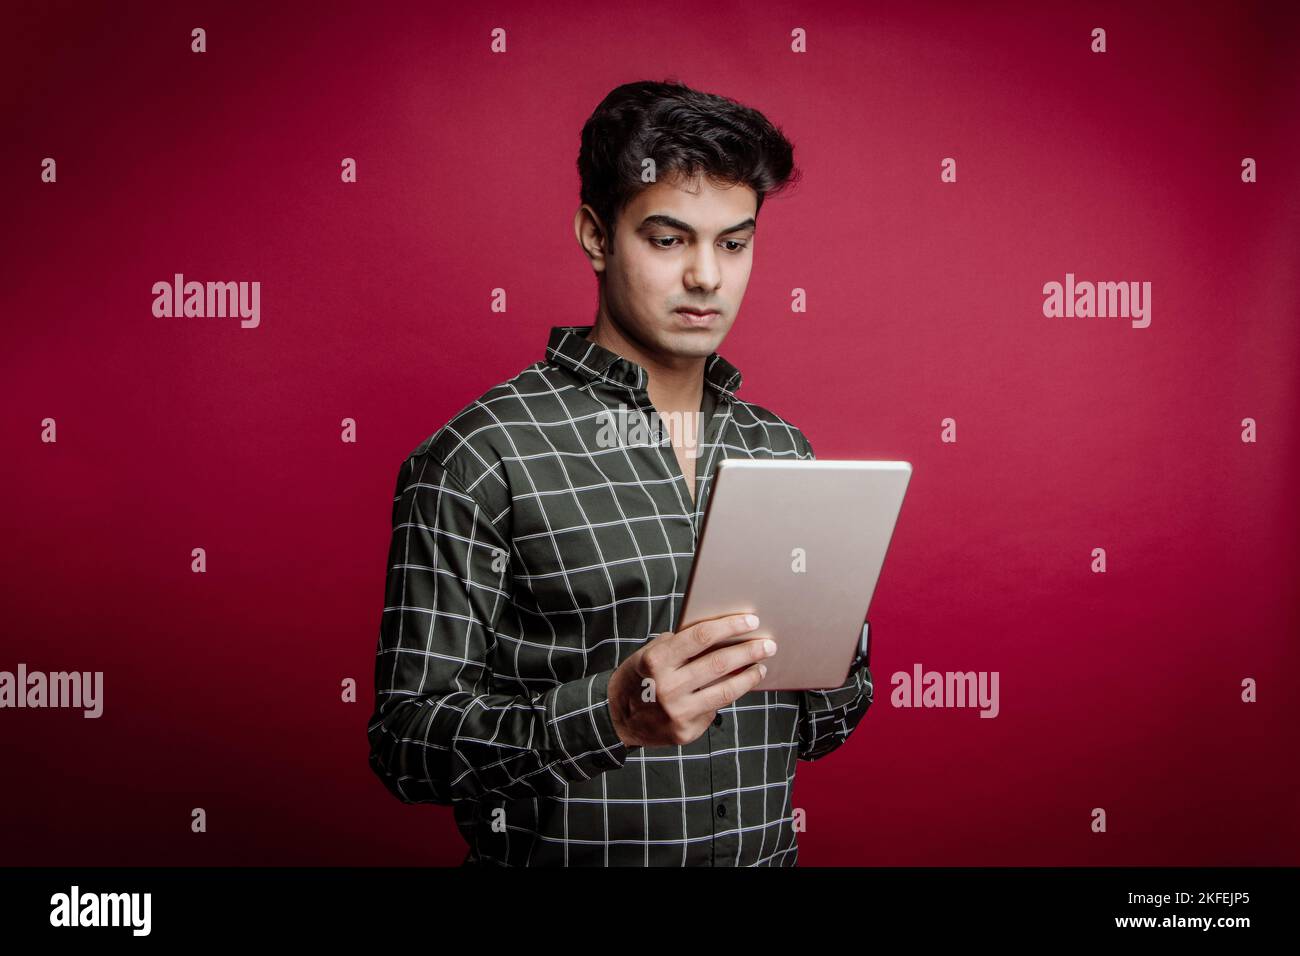 A confident Indian man in a checkered shirt using digital tablet against red background attending an online business meeting with his foreign clients. Stock Photo